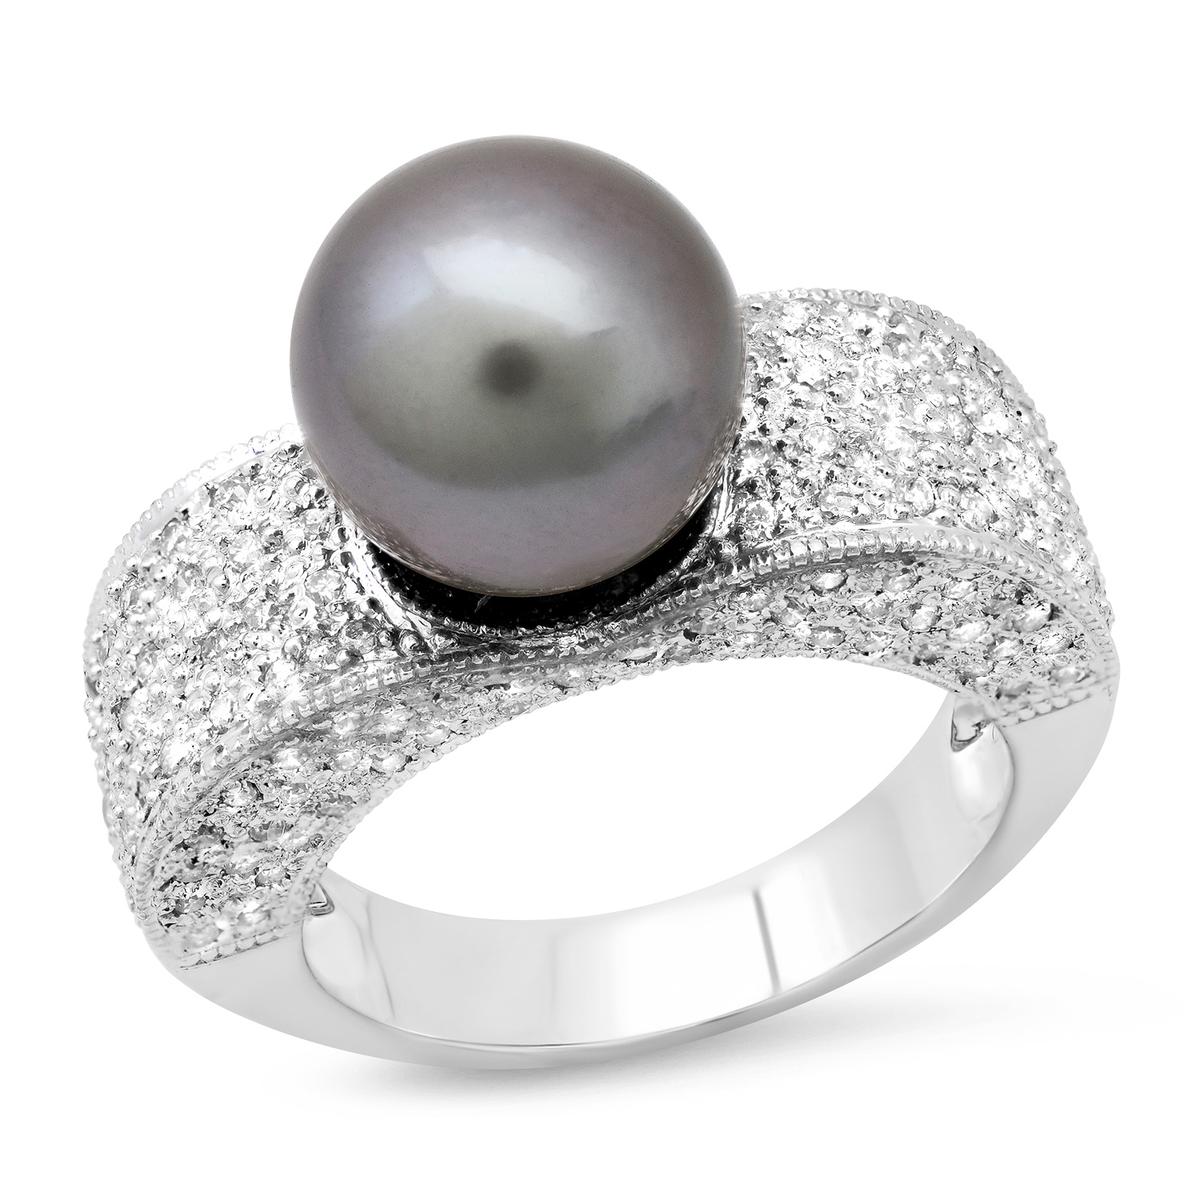 14K White Gold Setting with One 10.5mm South Sea Pearl and 0.70ct Diamond Ring